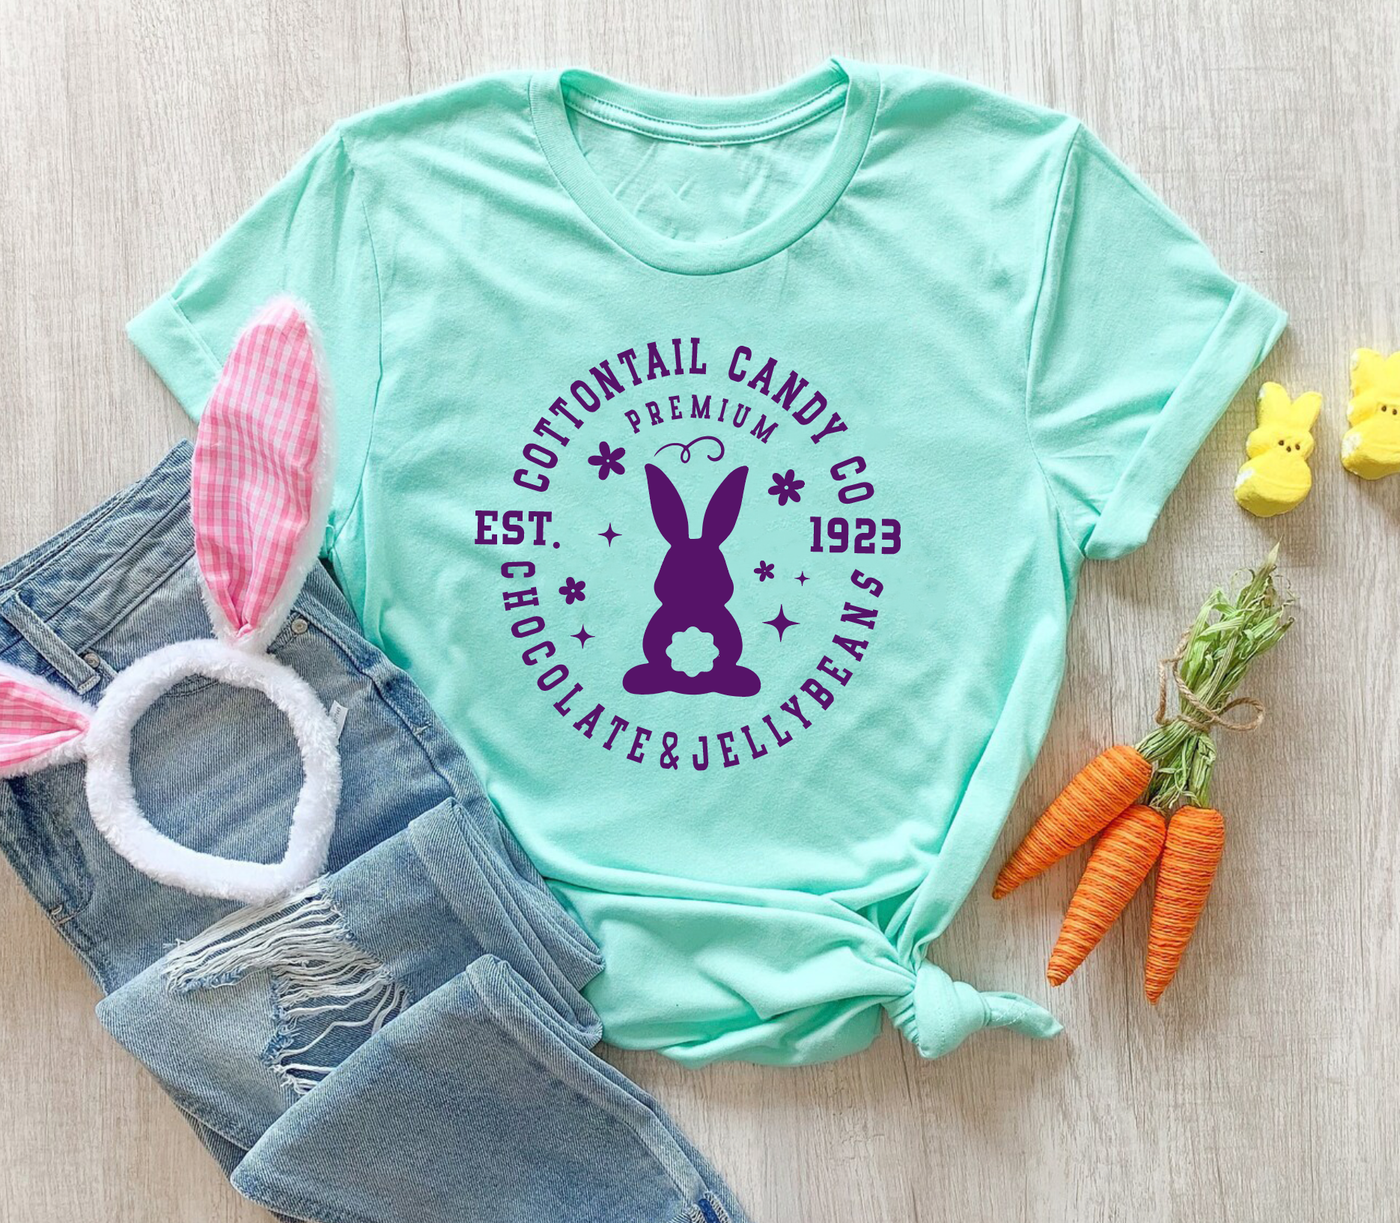 Cottontail Candy Co. Graphic T-shirt